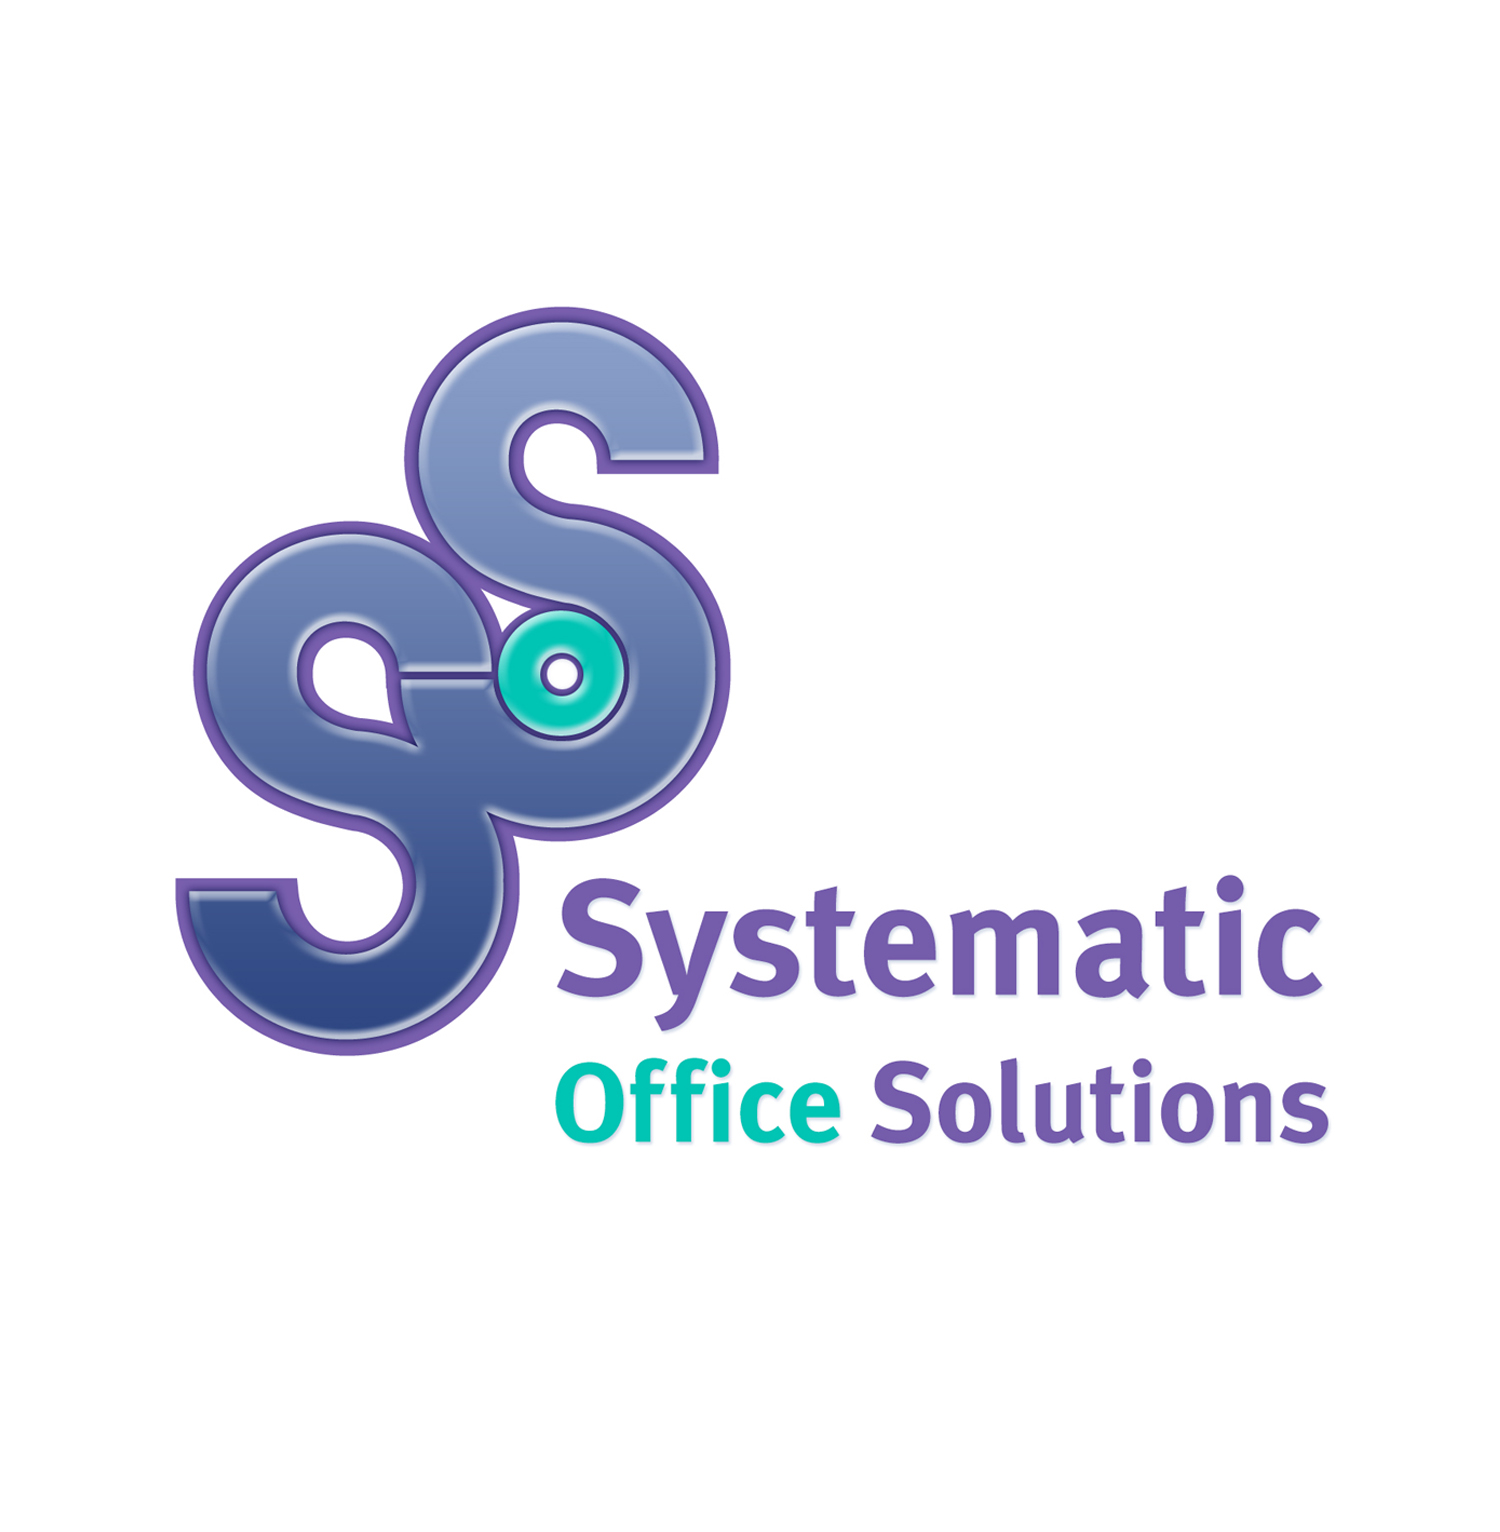 Systematic Office Solutions logo